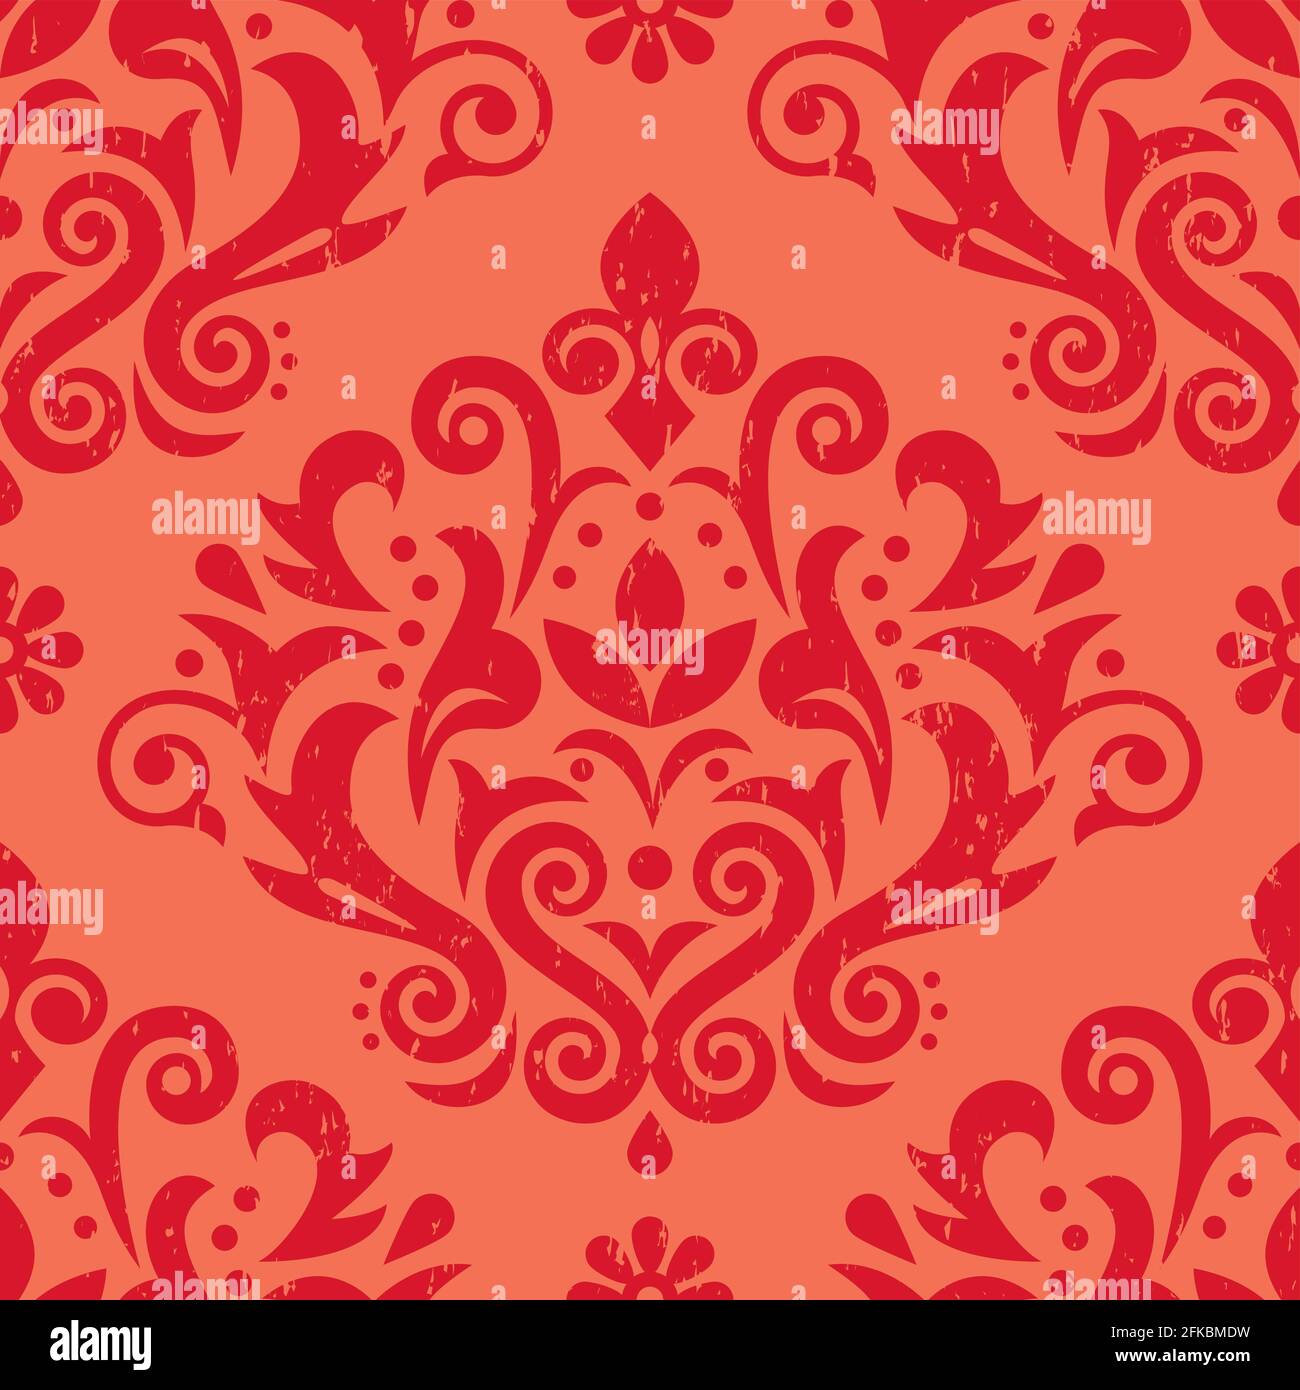 Damask retro scratched vector seamless pattern, victorian red textile or fabric print design with flowers, swirls and leaves Stock Vector